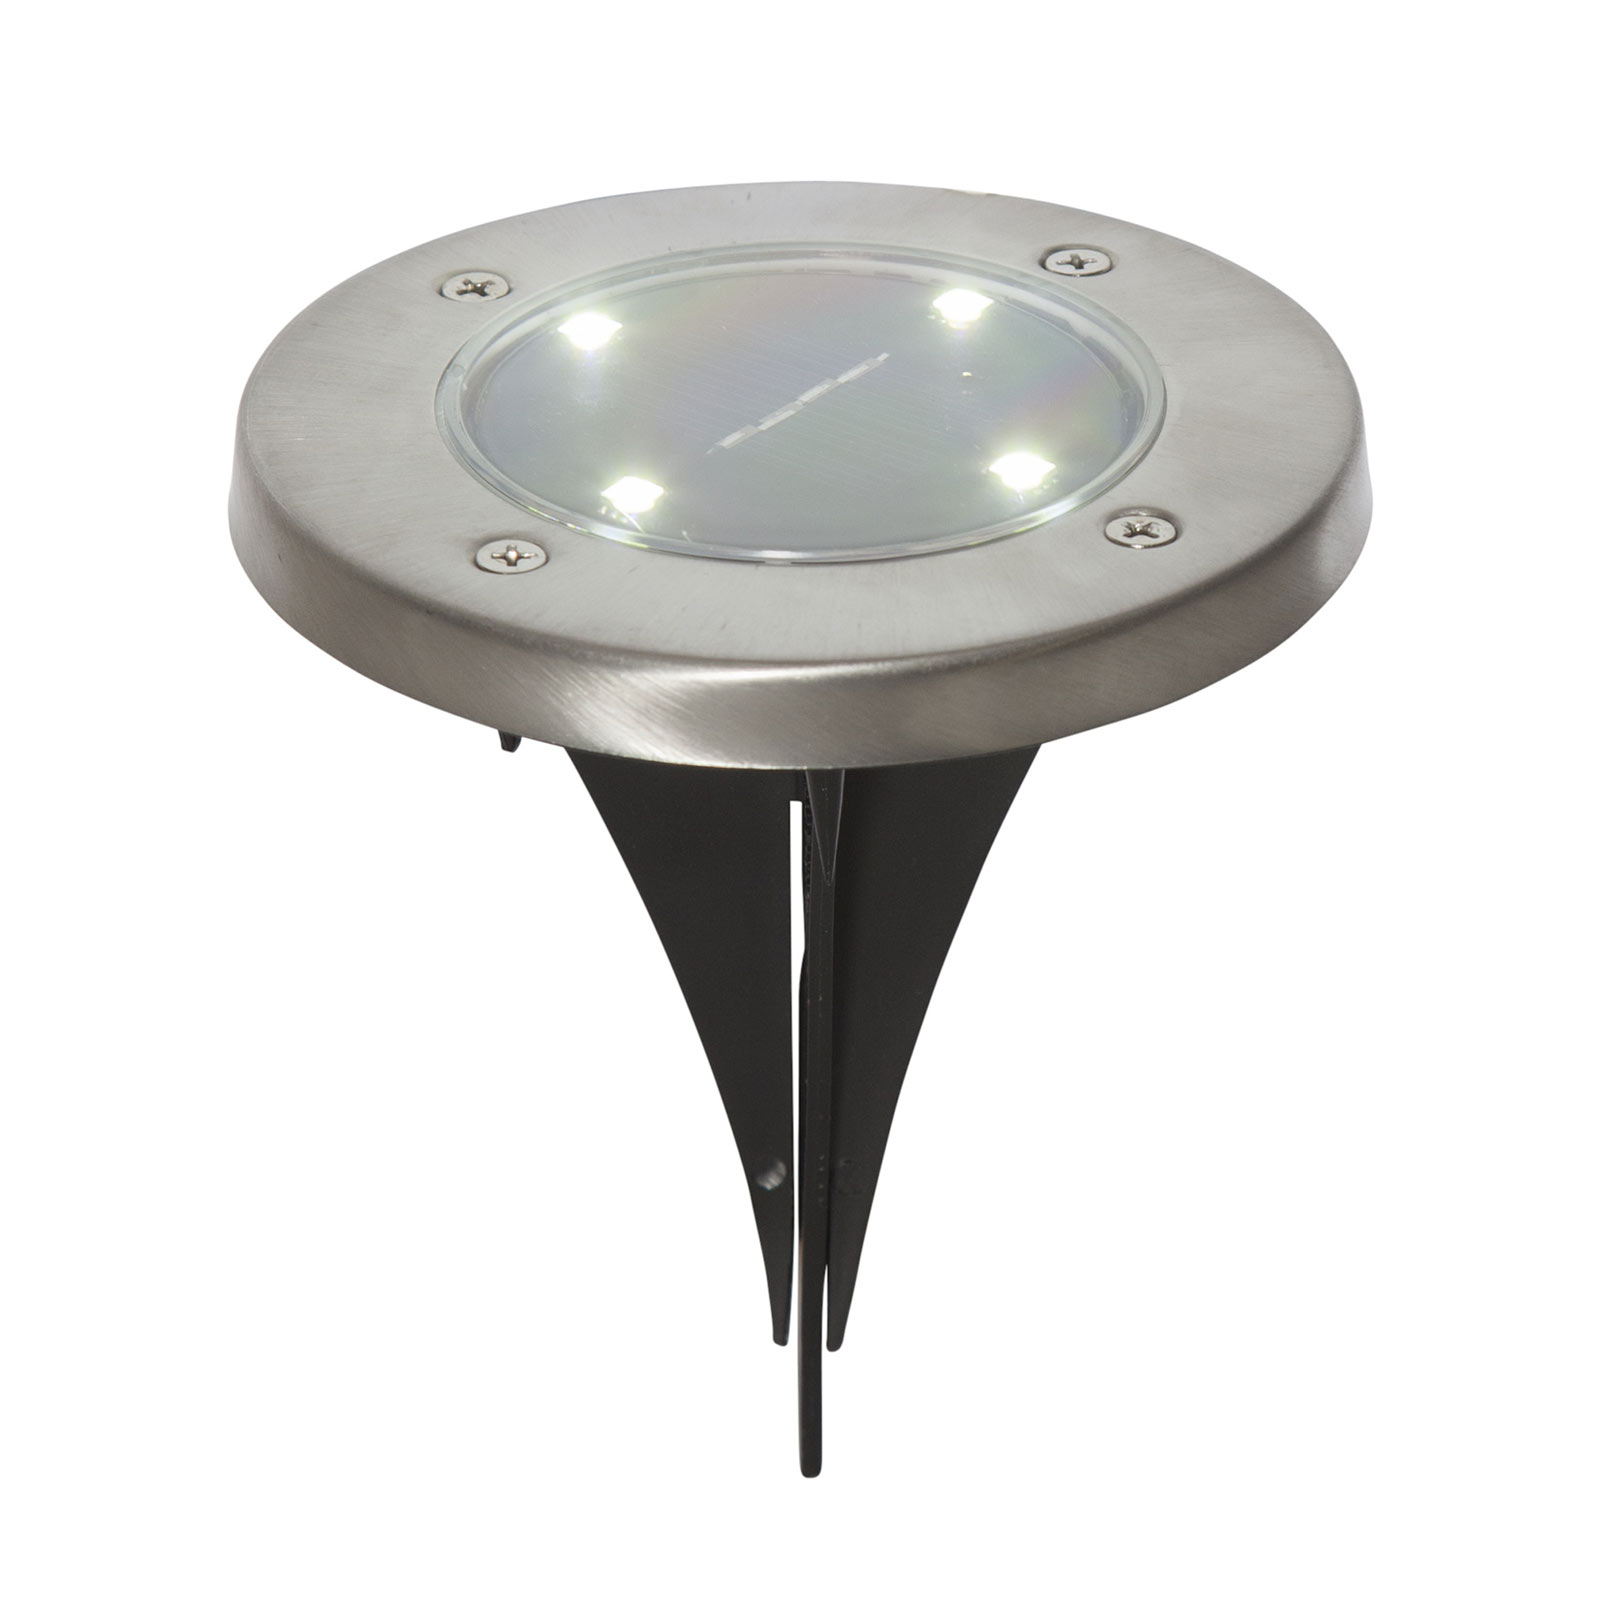 Lawnlight LED solar light, with ground spike